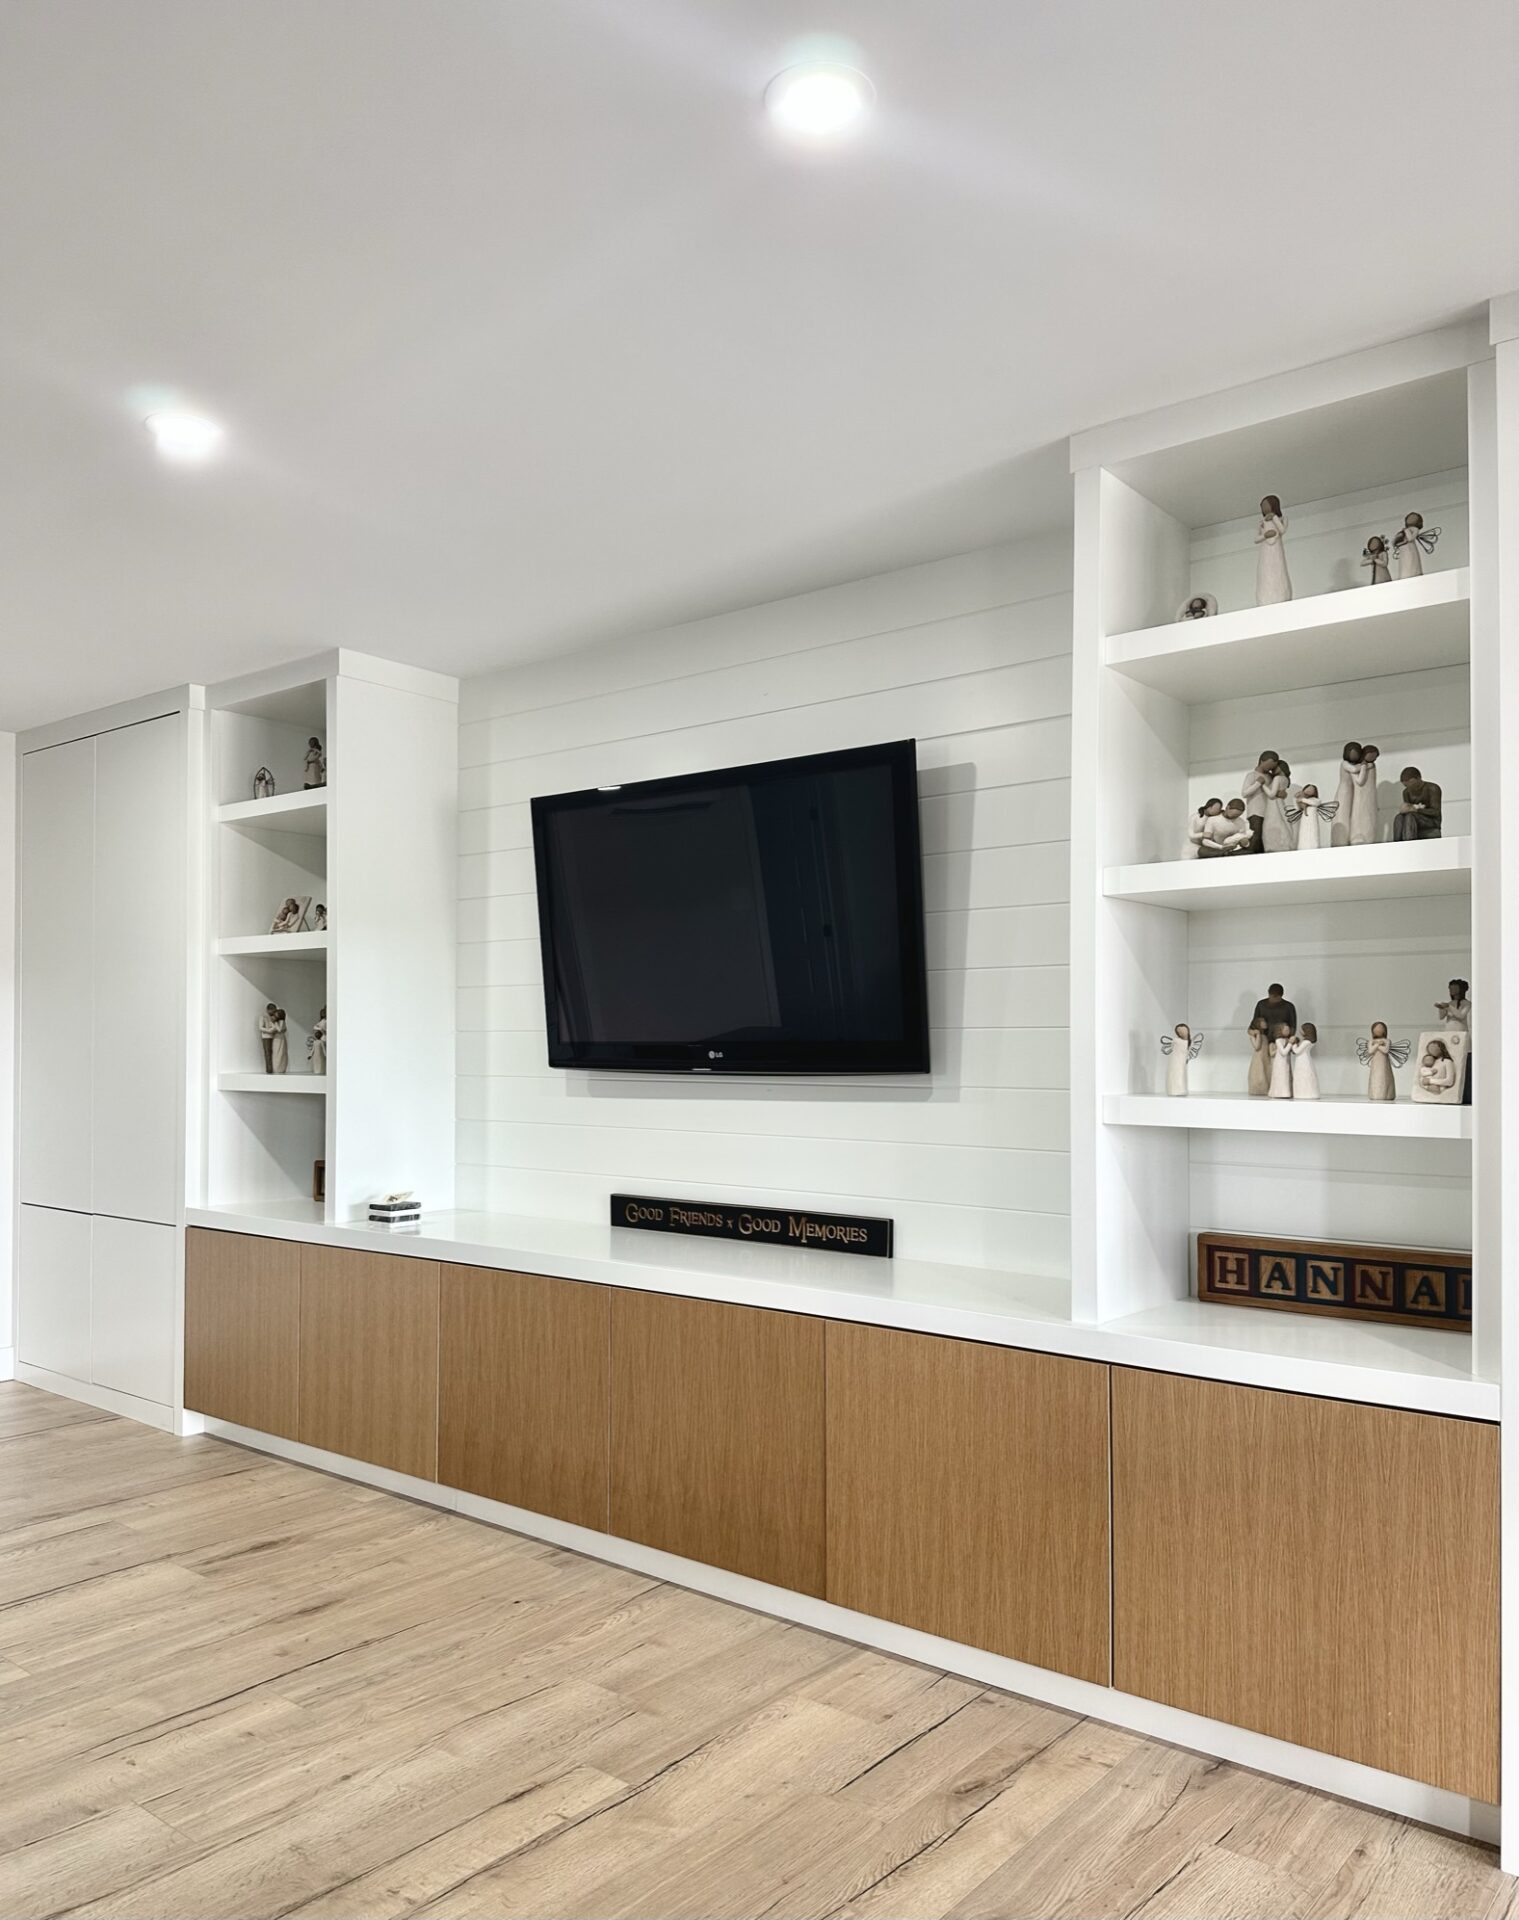 Modern living room interior featuring a mounted TV between white shelving units displaying decorative figures, with a wooden cabinet below and recessed lighting above.